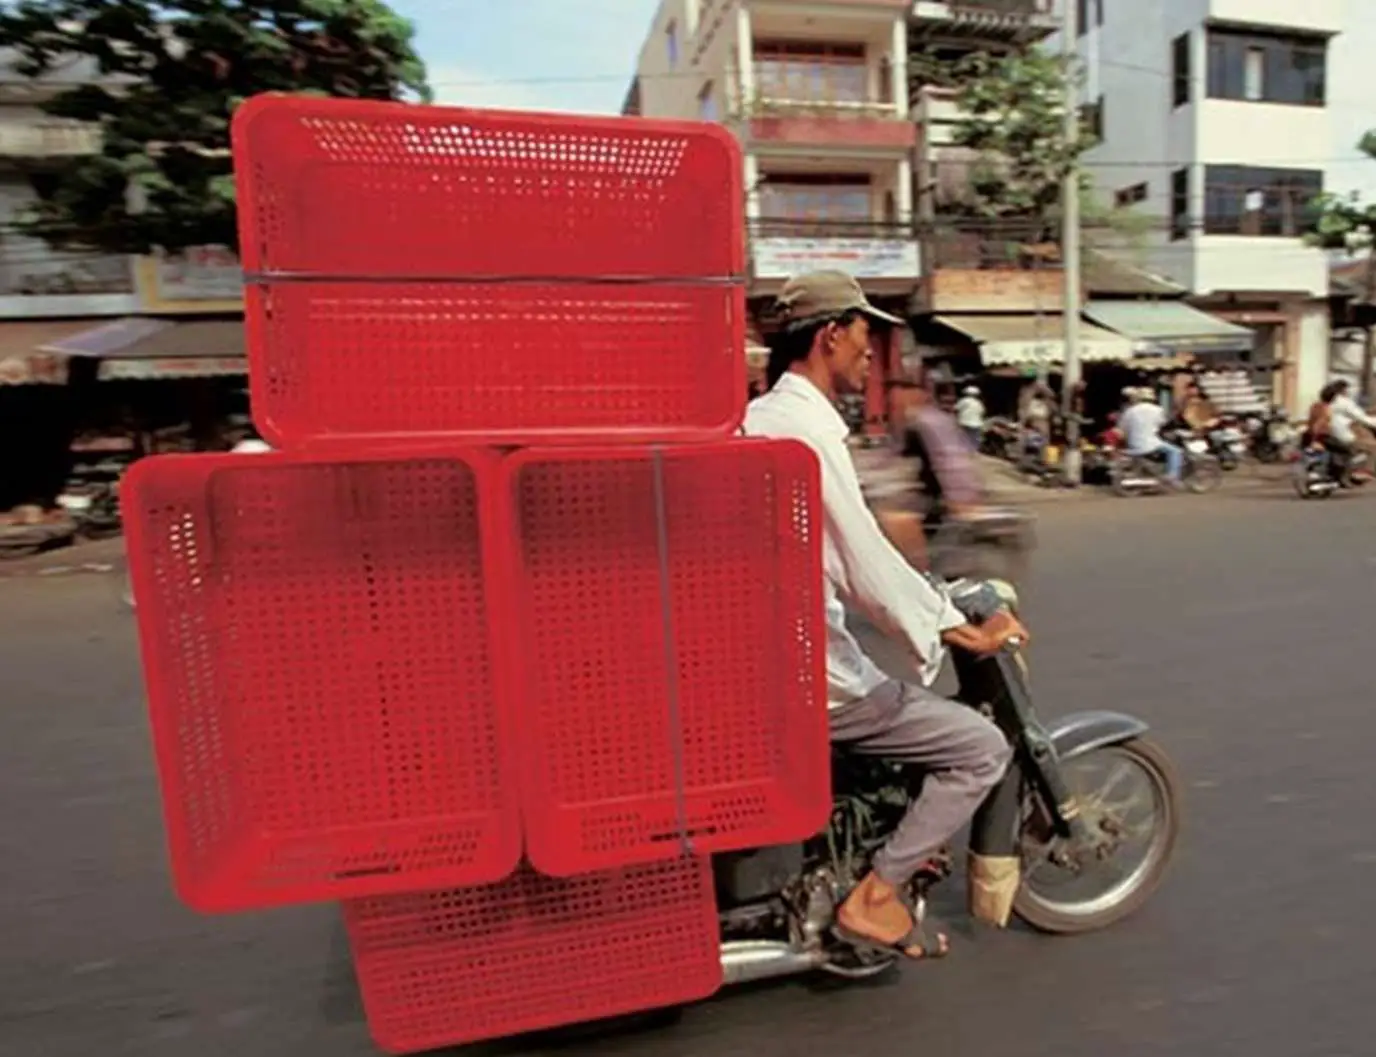 Crates On Motor Scooter